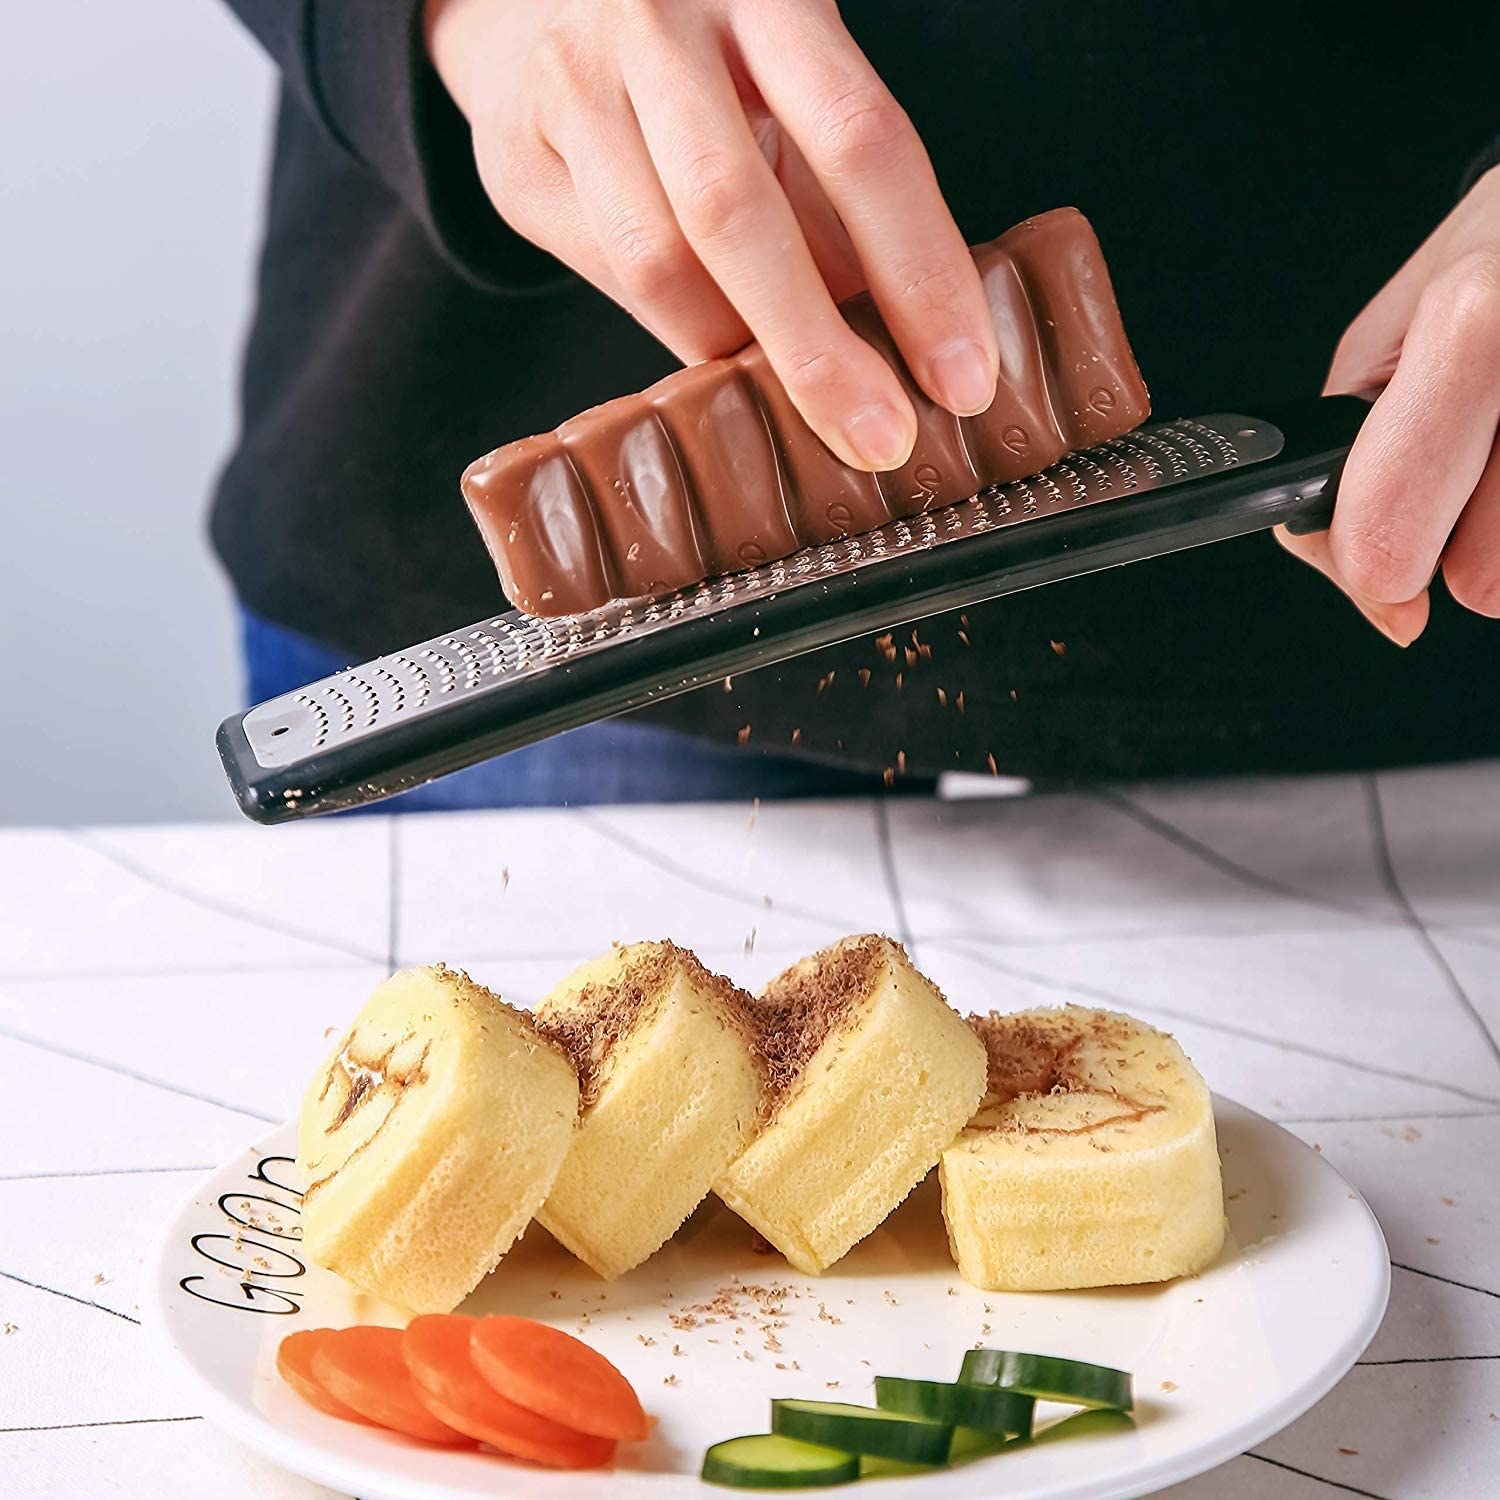 A person using the microplane to grate chocolate